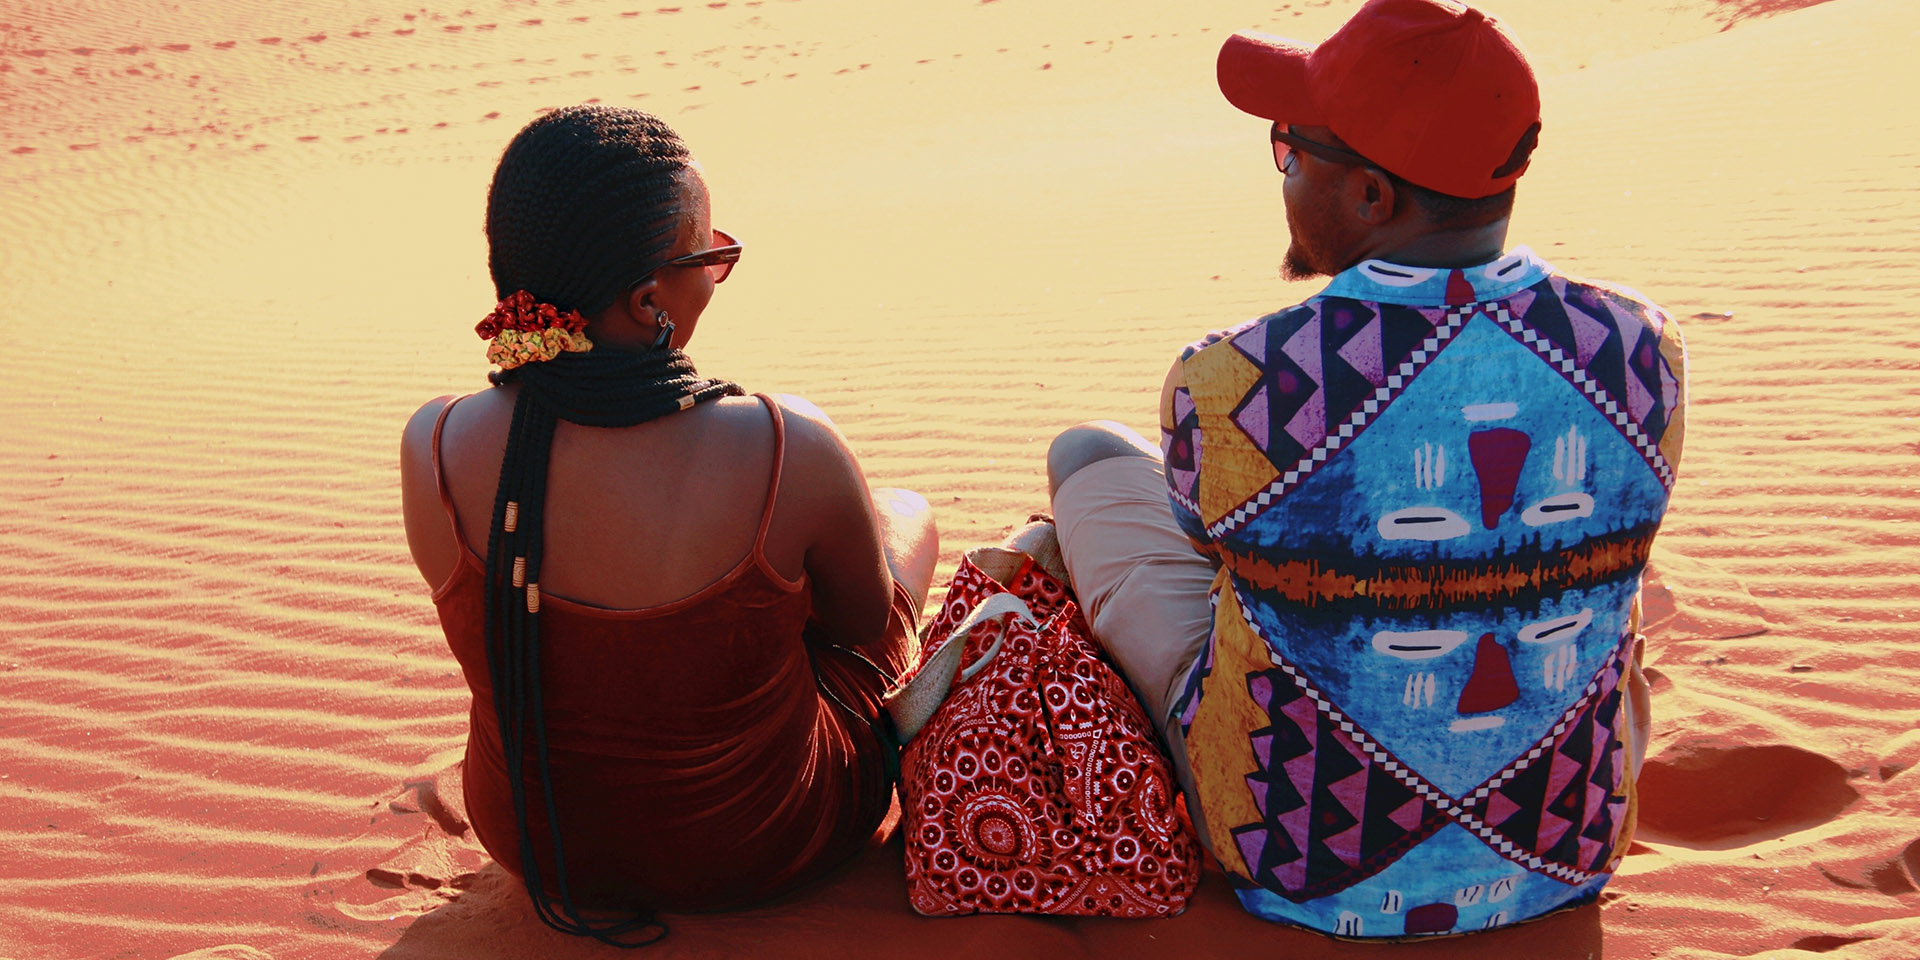 Couple on a dune in the desert, Namibia